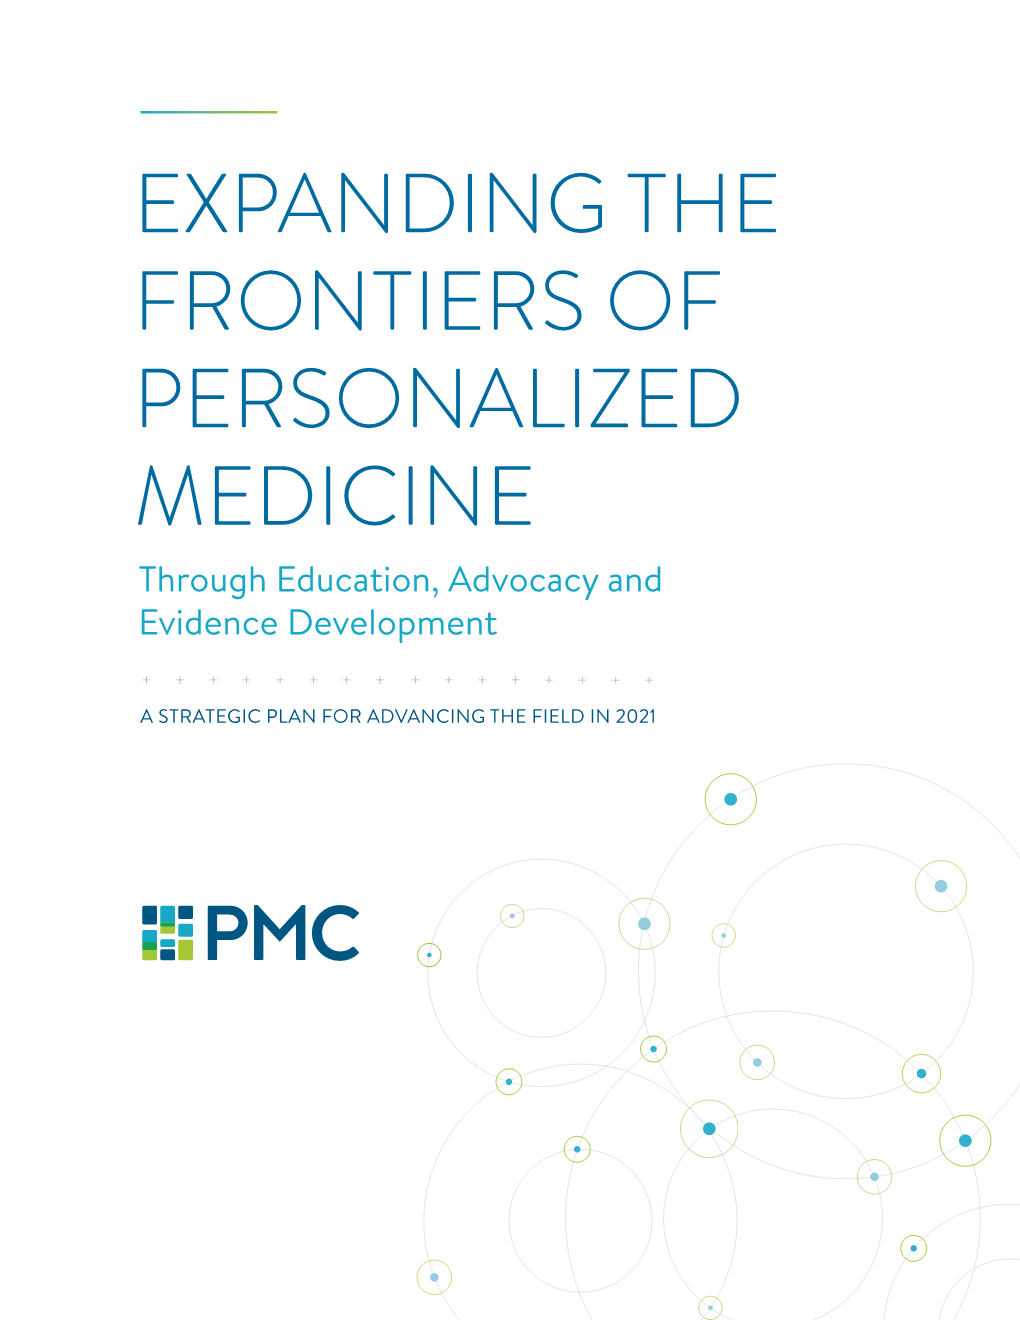 EXPANDING the FRONTIERS of PERSONALIZED MEDICINE Through Education, Advocacy and Evidence Development